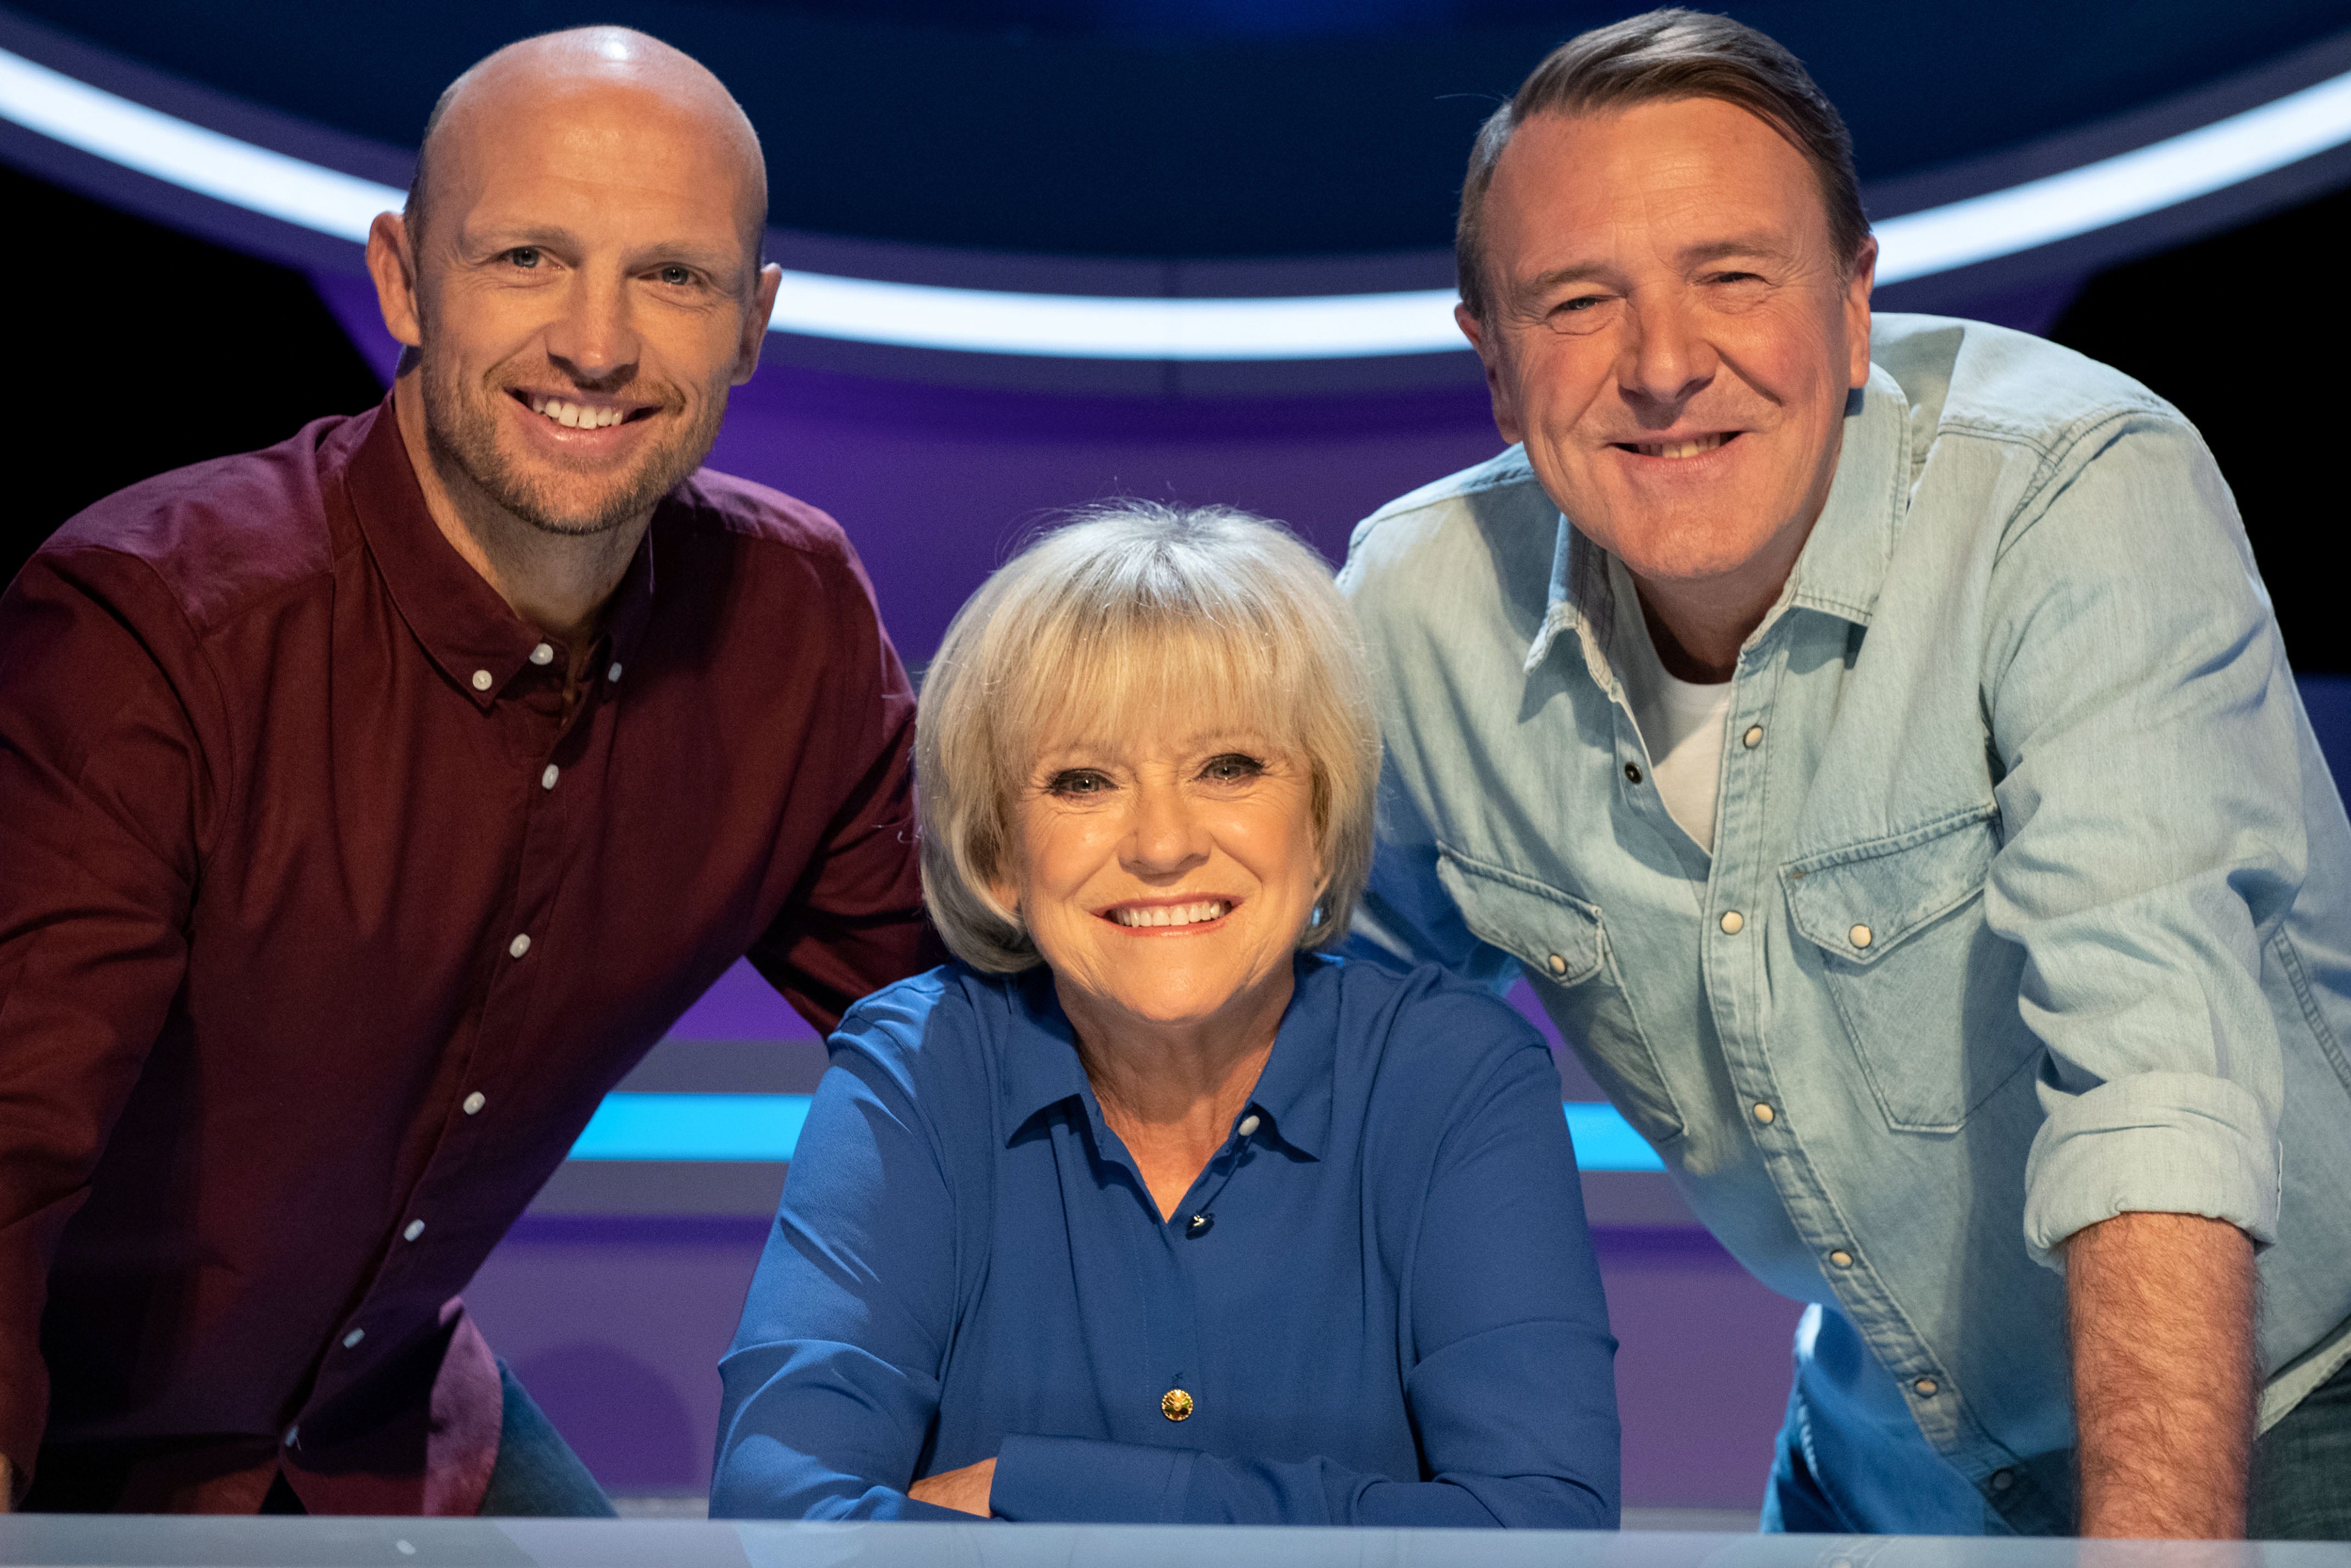 Sue Barker with Matt Dawson and Phil Tufnell on ‘A Question of Sport’